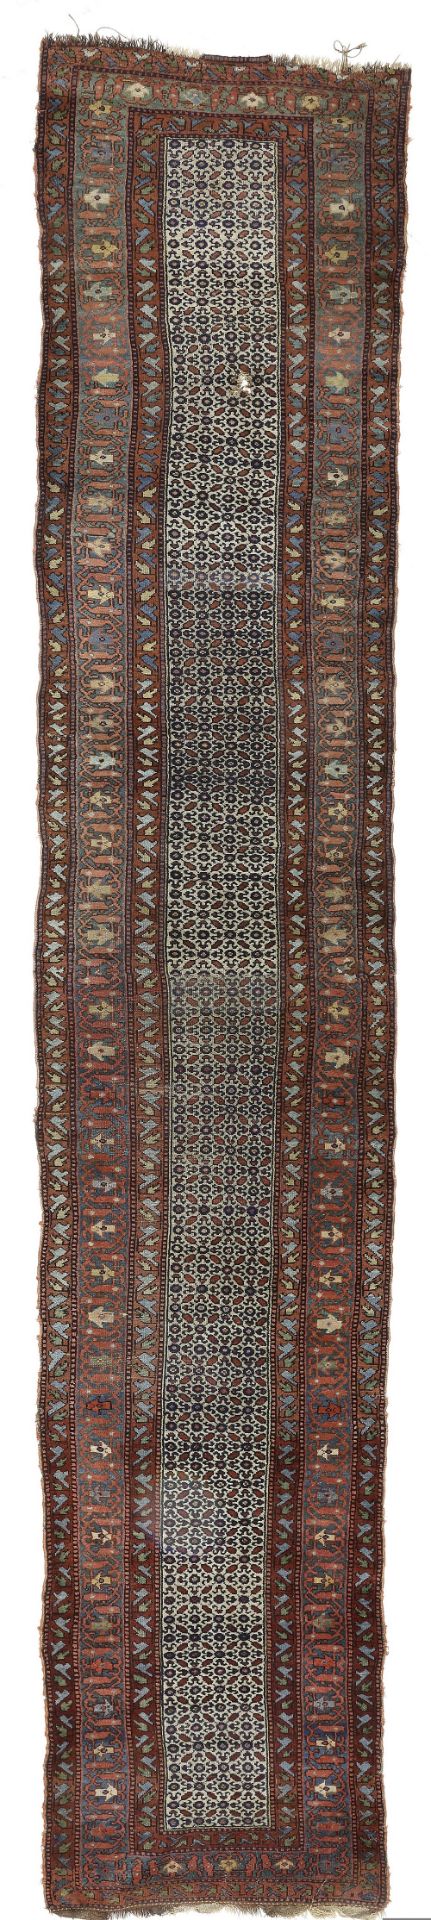 A NORTH WEST PERSIAN RUNNER, LATE 19TH CENTURY